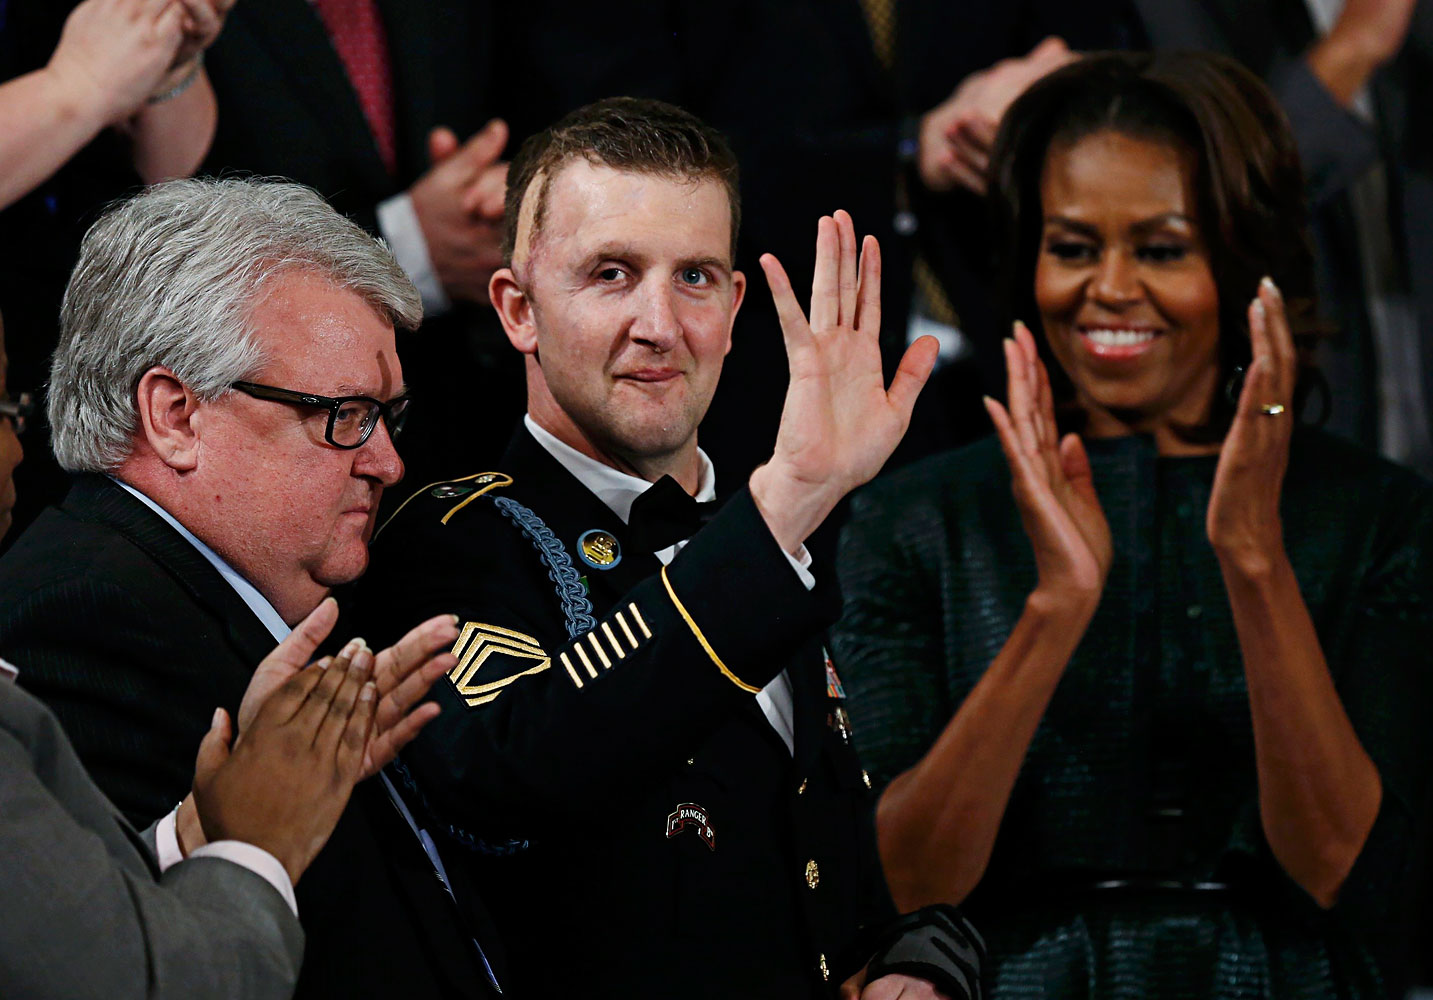 U.S. first lady Michelle Obama applauds U.S. Army Ranger Remsburg during State of the Union speech on Capitol Hill in Washington